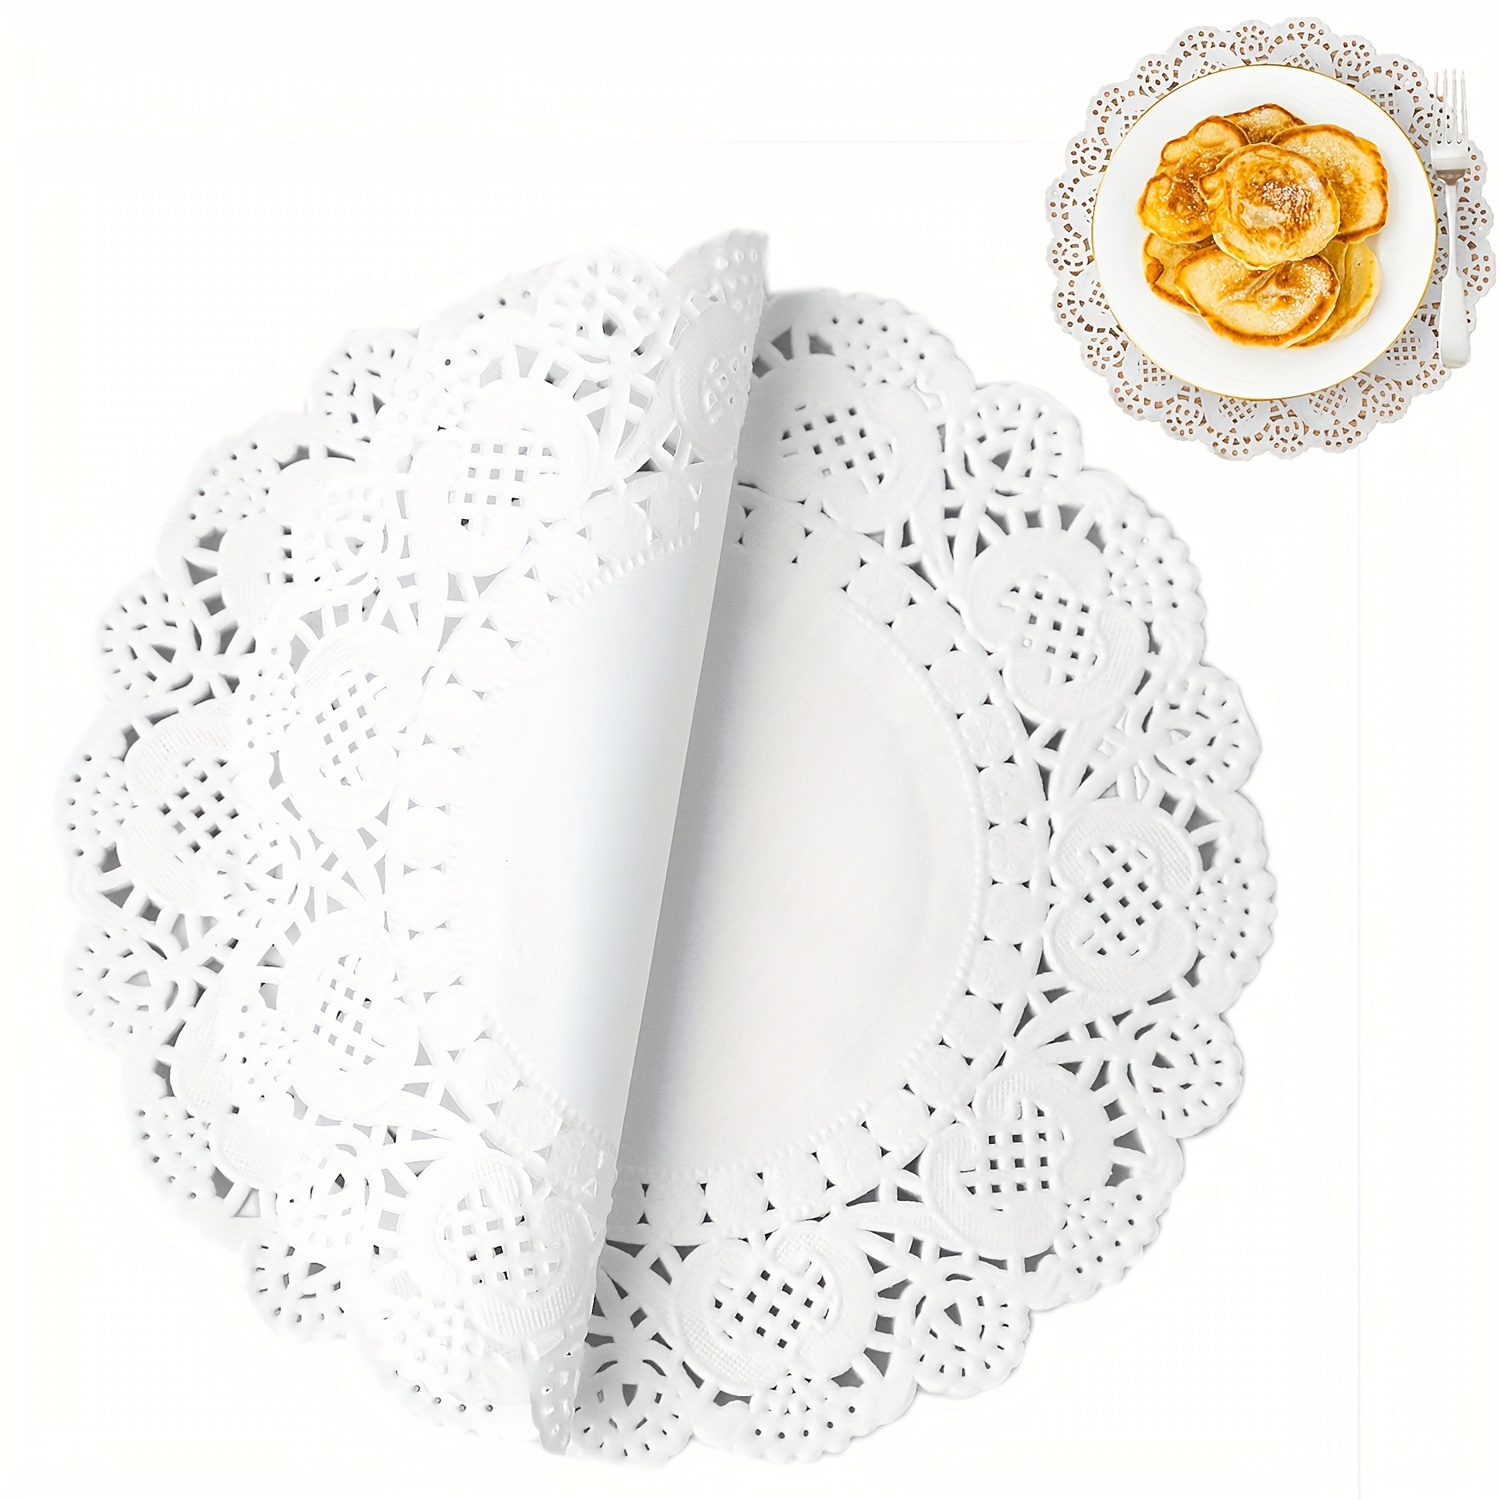  250 PCS Paper Doilies Lace Assorted Size Food Grade Modern  Decorative Placemats Bulk Add Elegance to Crafts, Coffee, Cake, Desert,  Table, Wedding, Tableware Decoration (Round Rectangle Oval White) : Home 